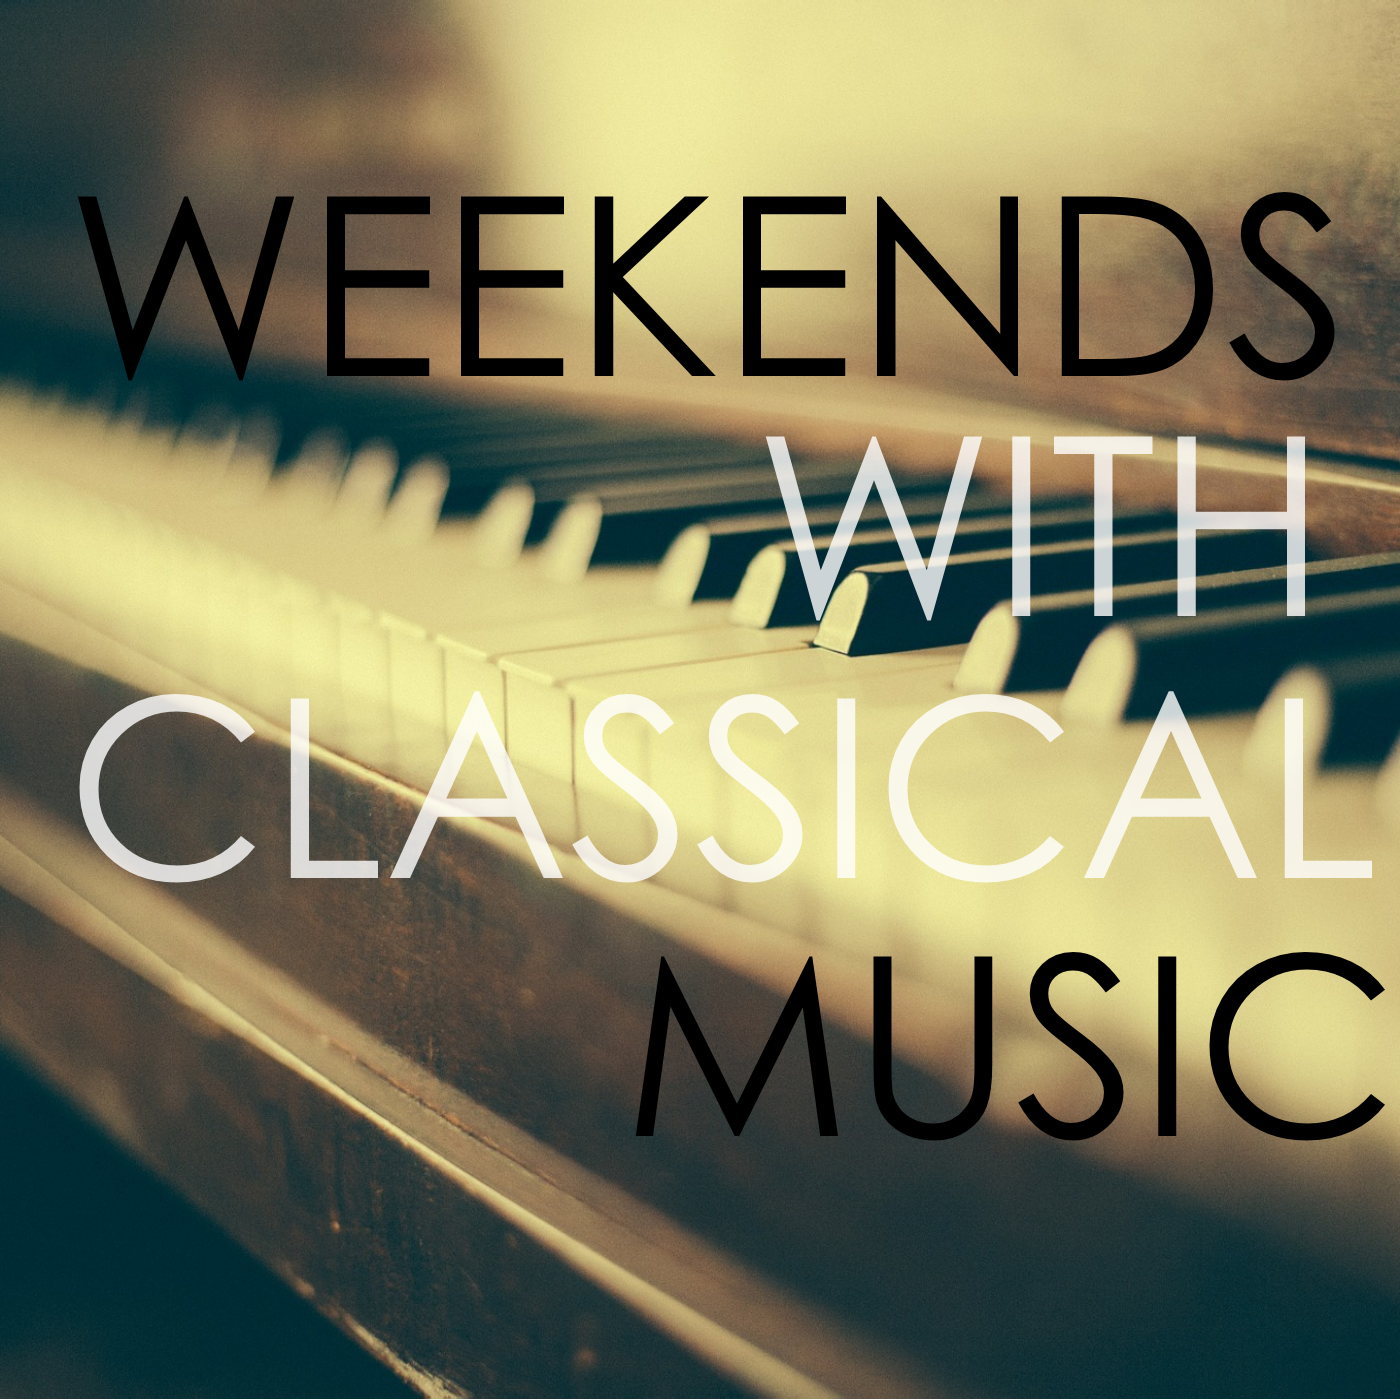 Weekends With Classical music